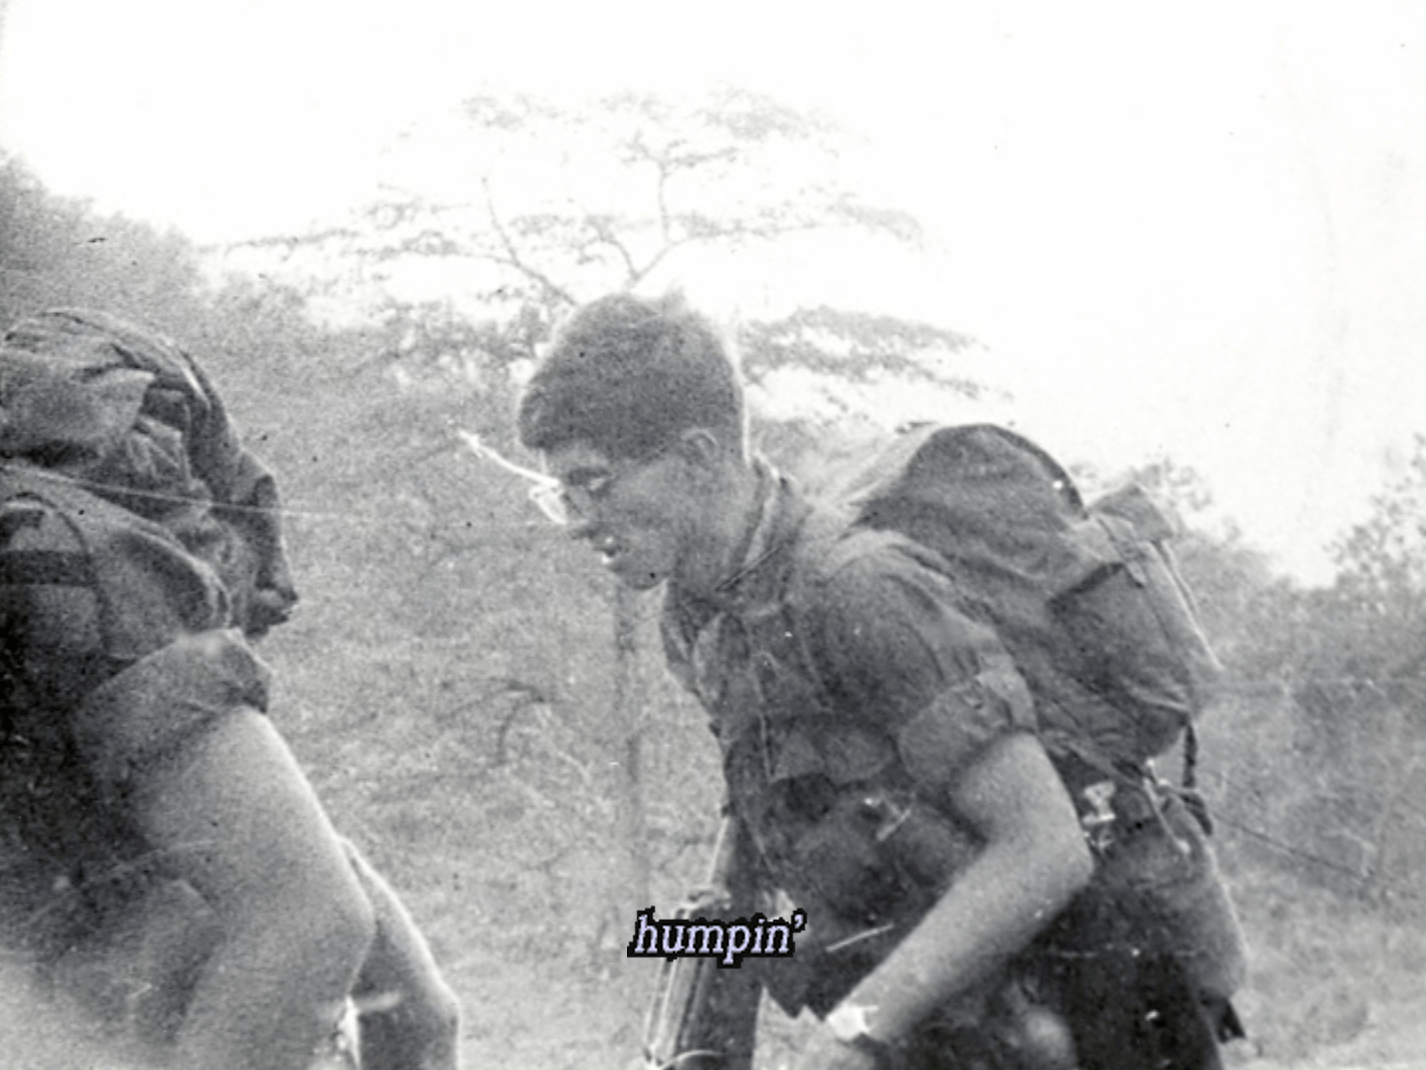 Two soldiers with large packs on their backs, walking. Text on photo says "humpin'."